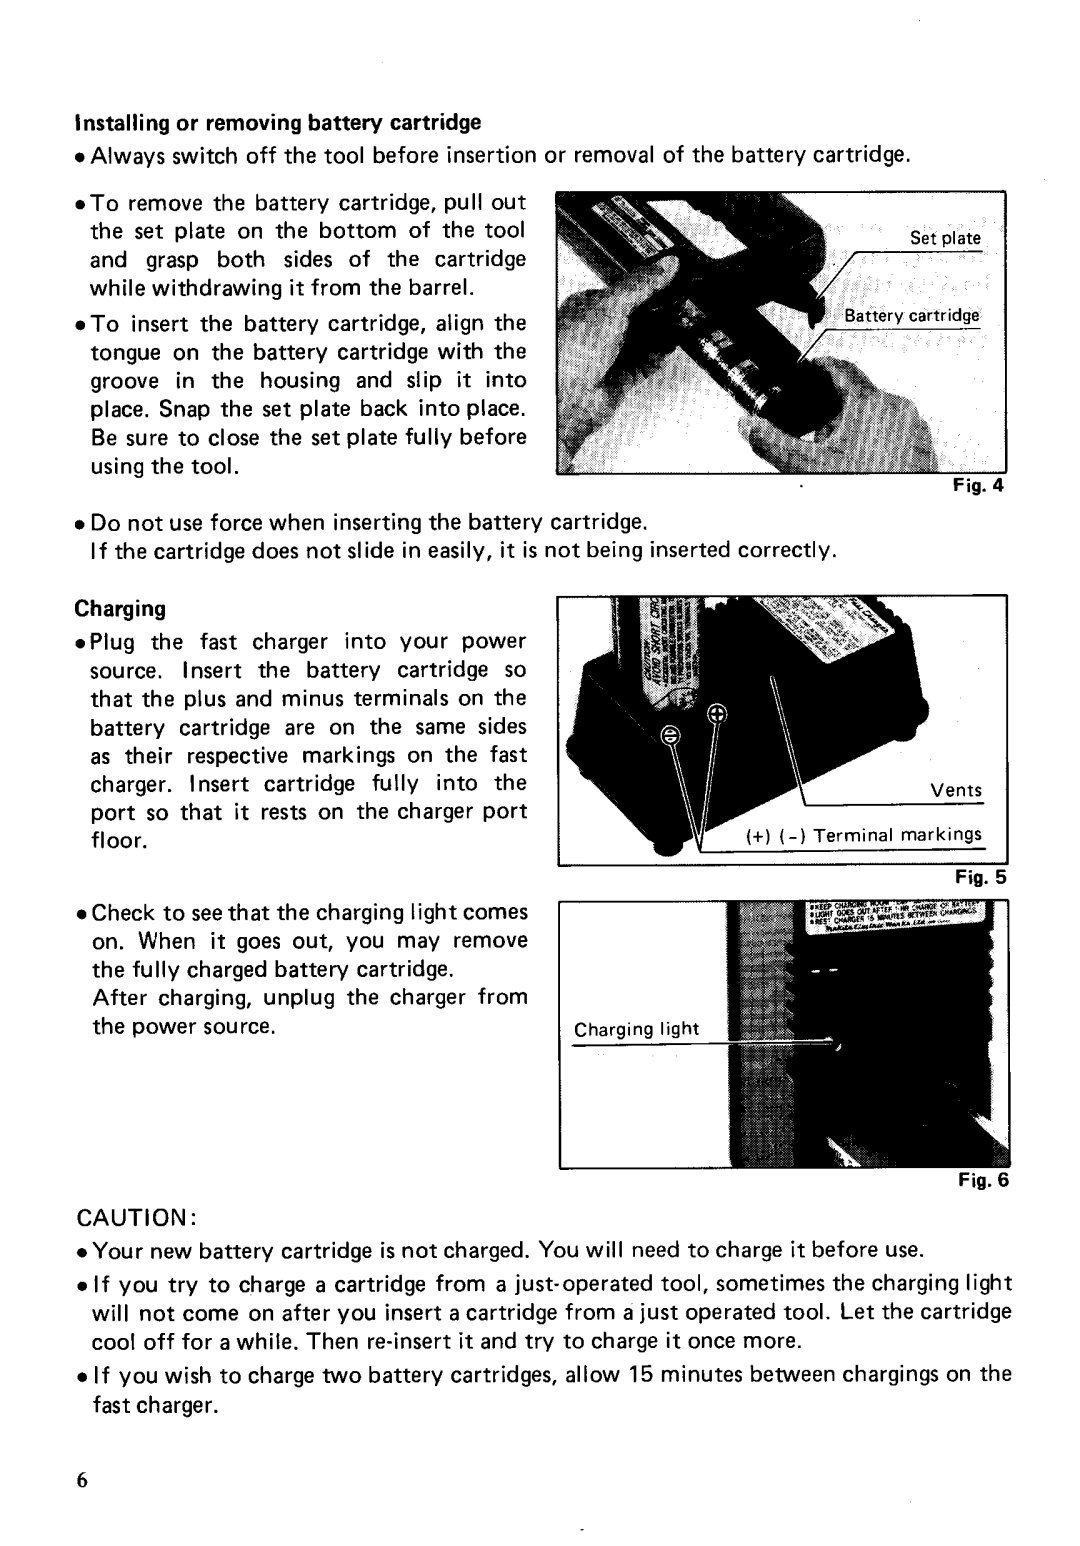 Makita UML2OOD Installing or removing battery cartridge, Do not use force when inserting the battery cartridge, Charging 